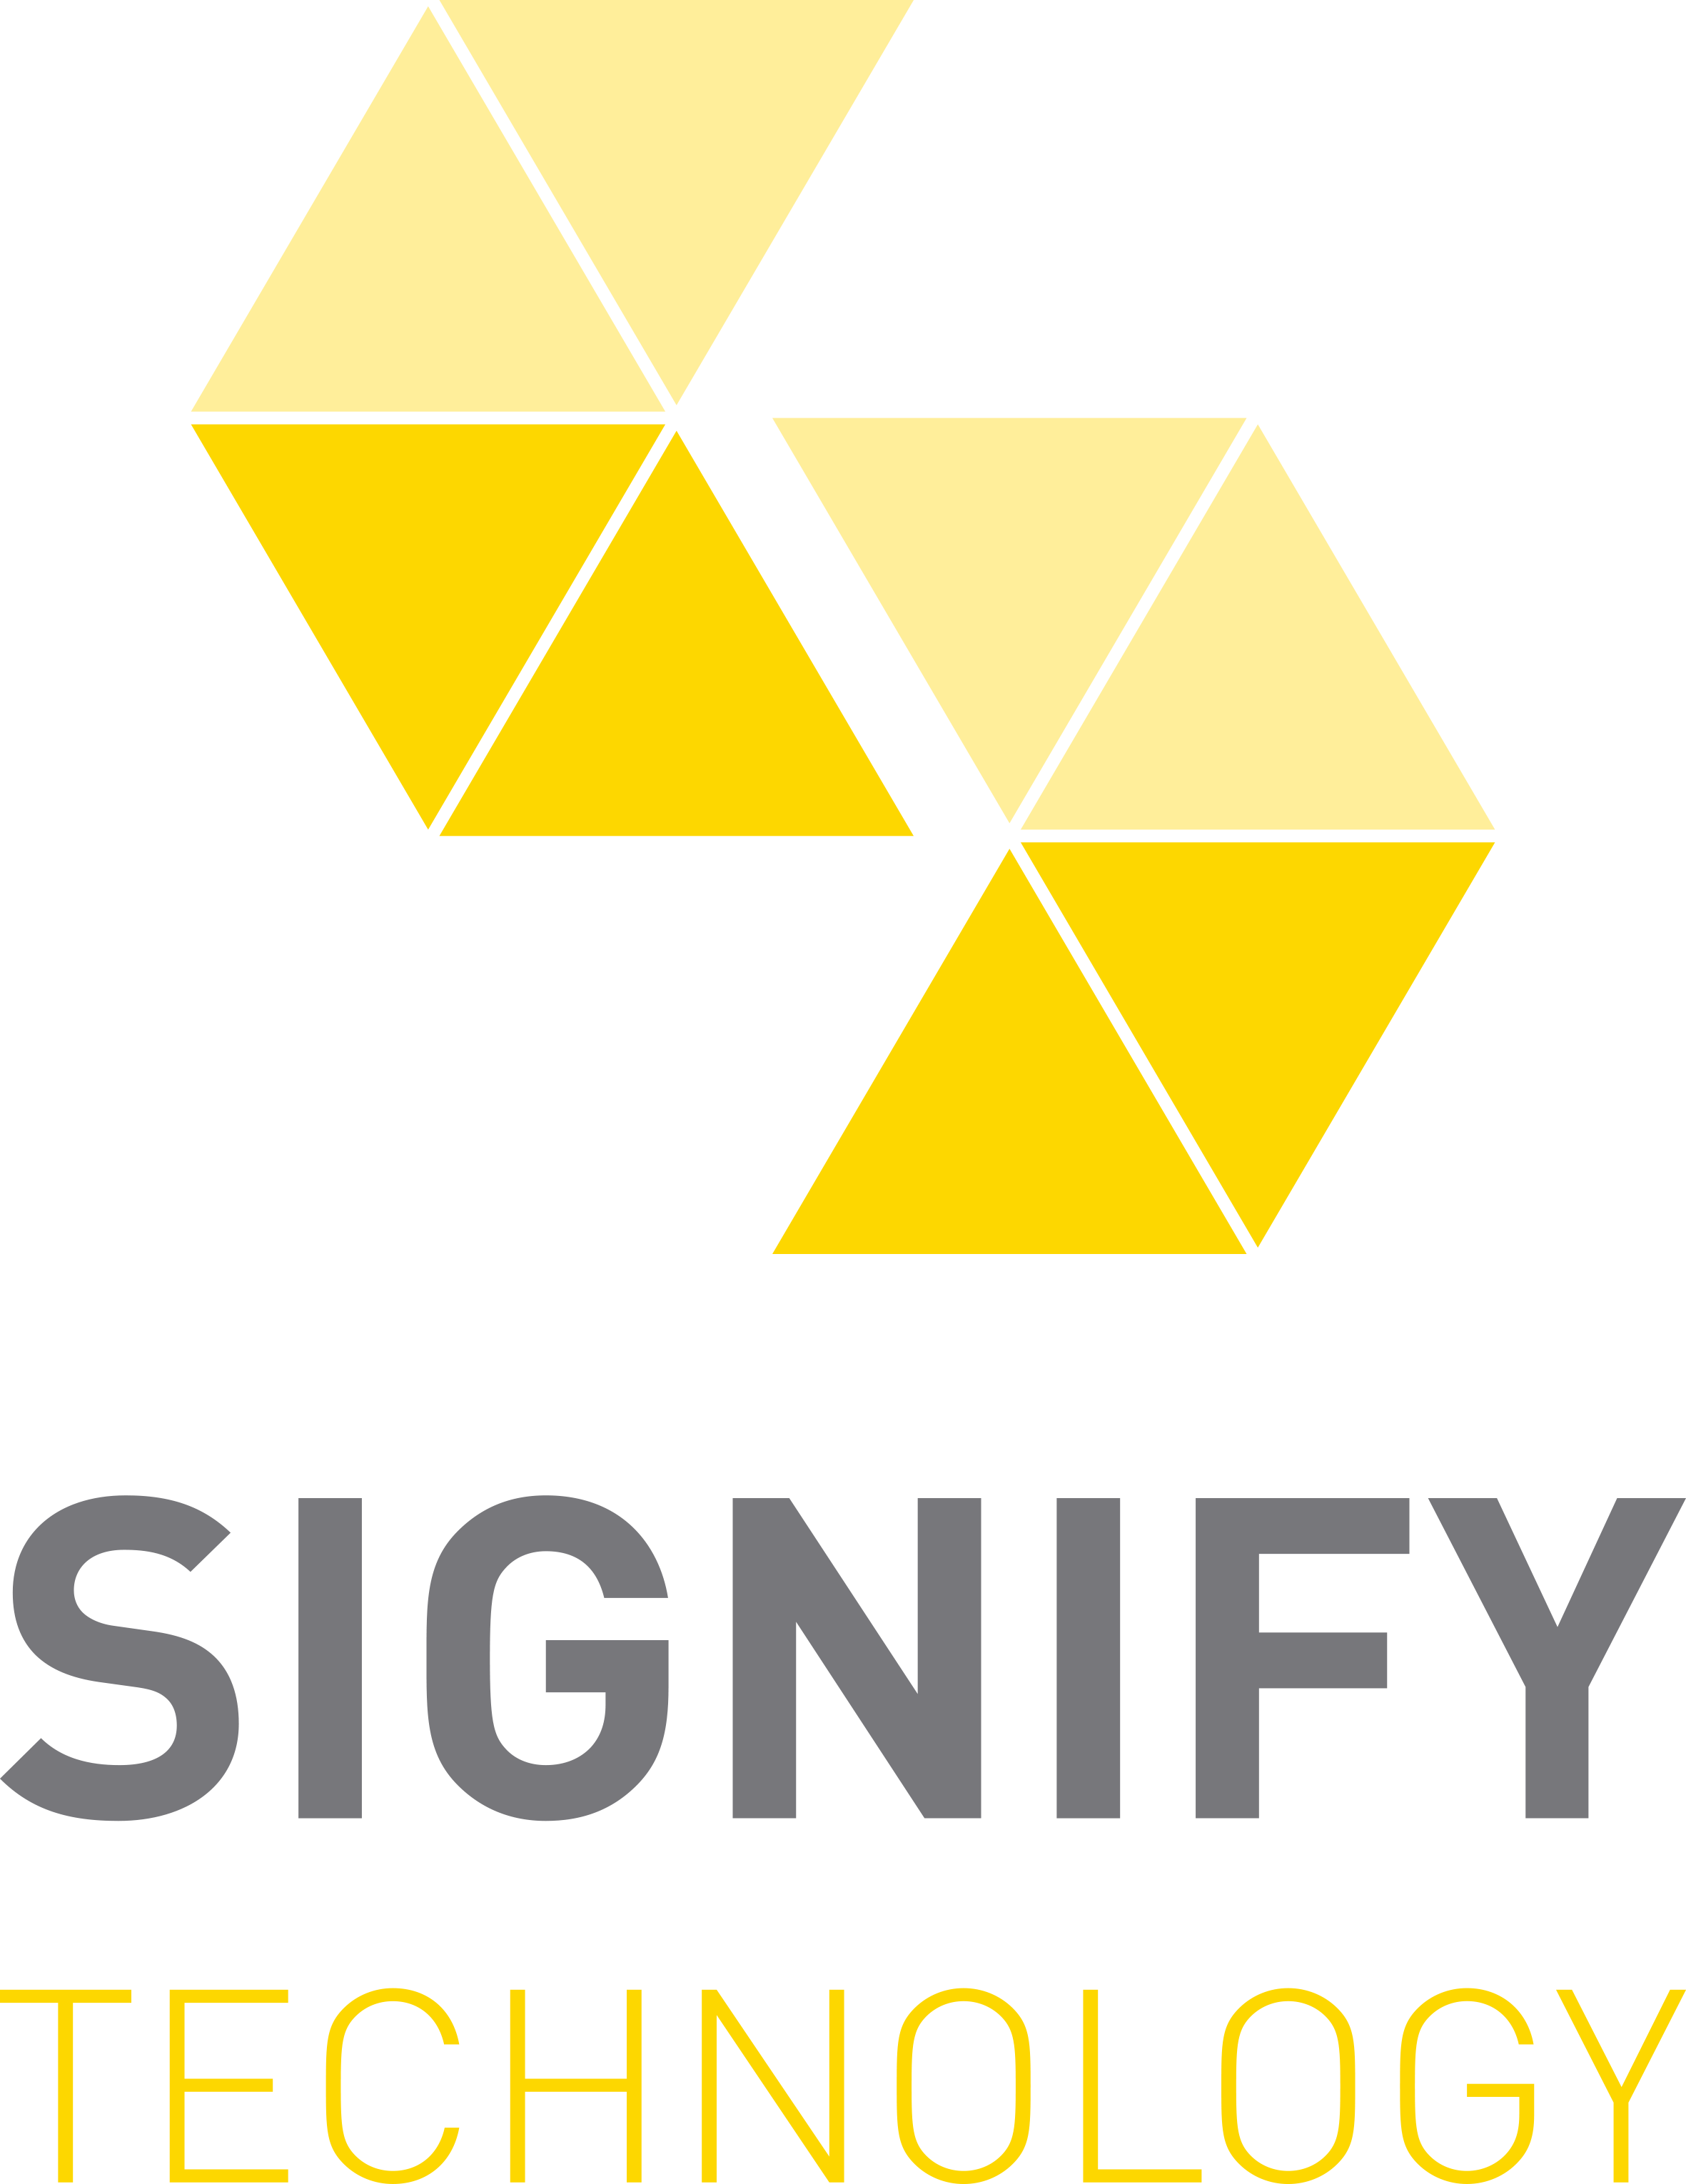 Signify Technology